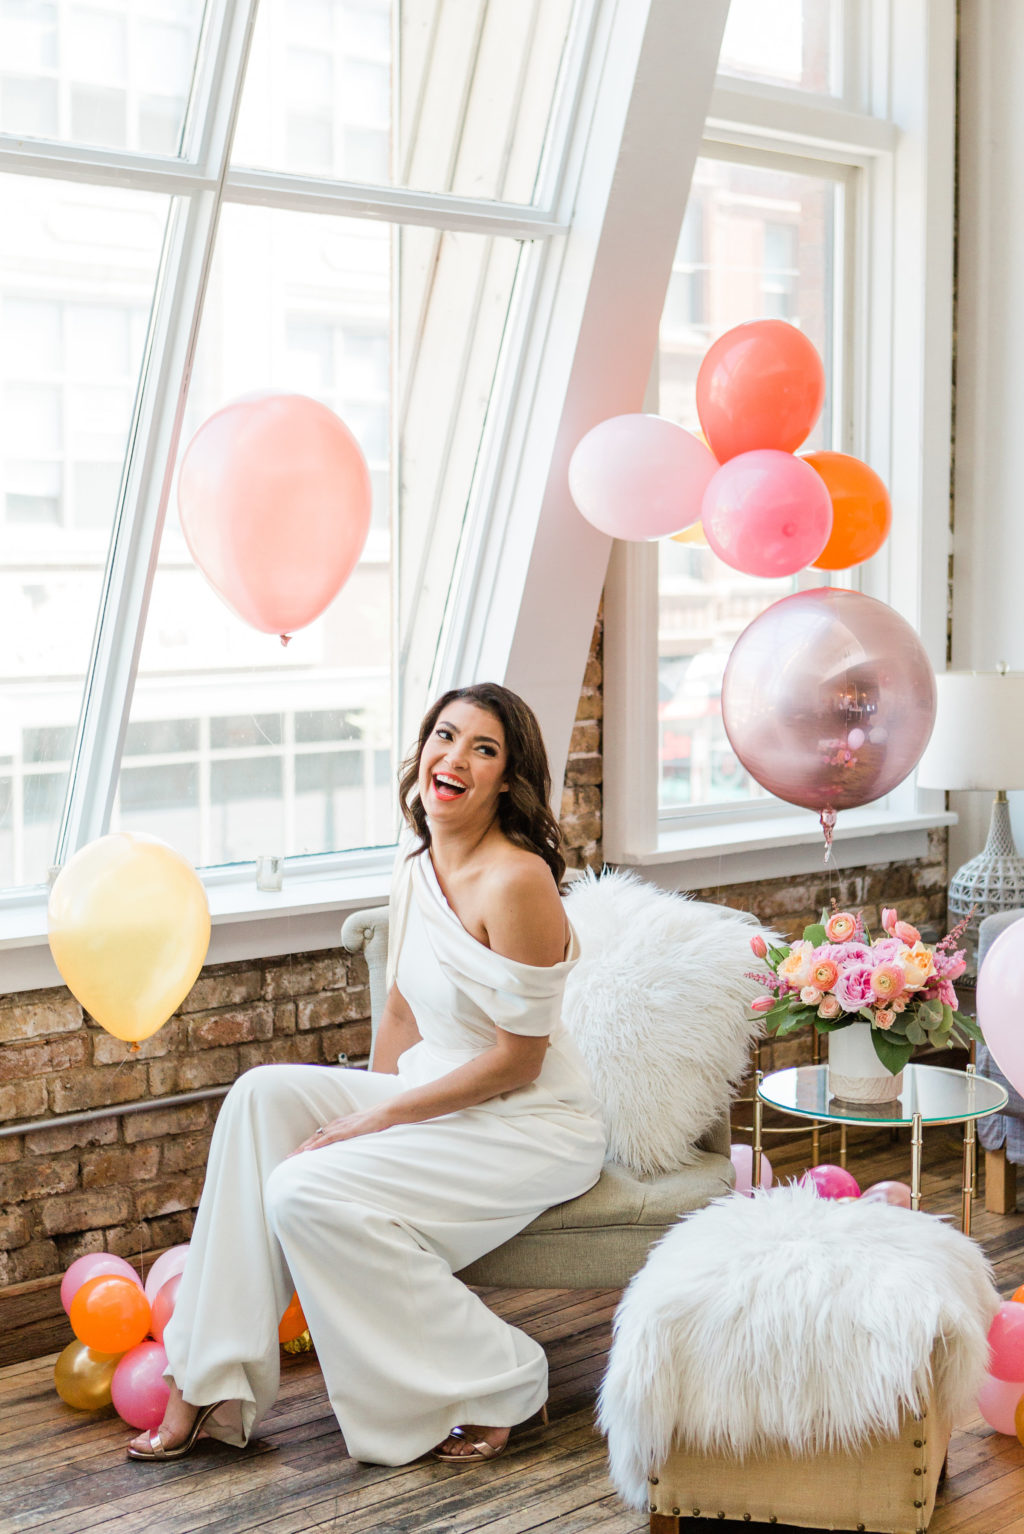 Davids Bridal bridesmaid shower inspiration Photography by Lauryn 02